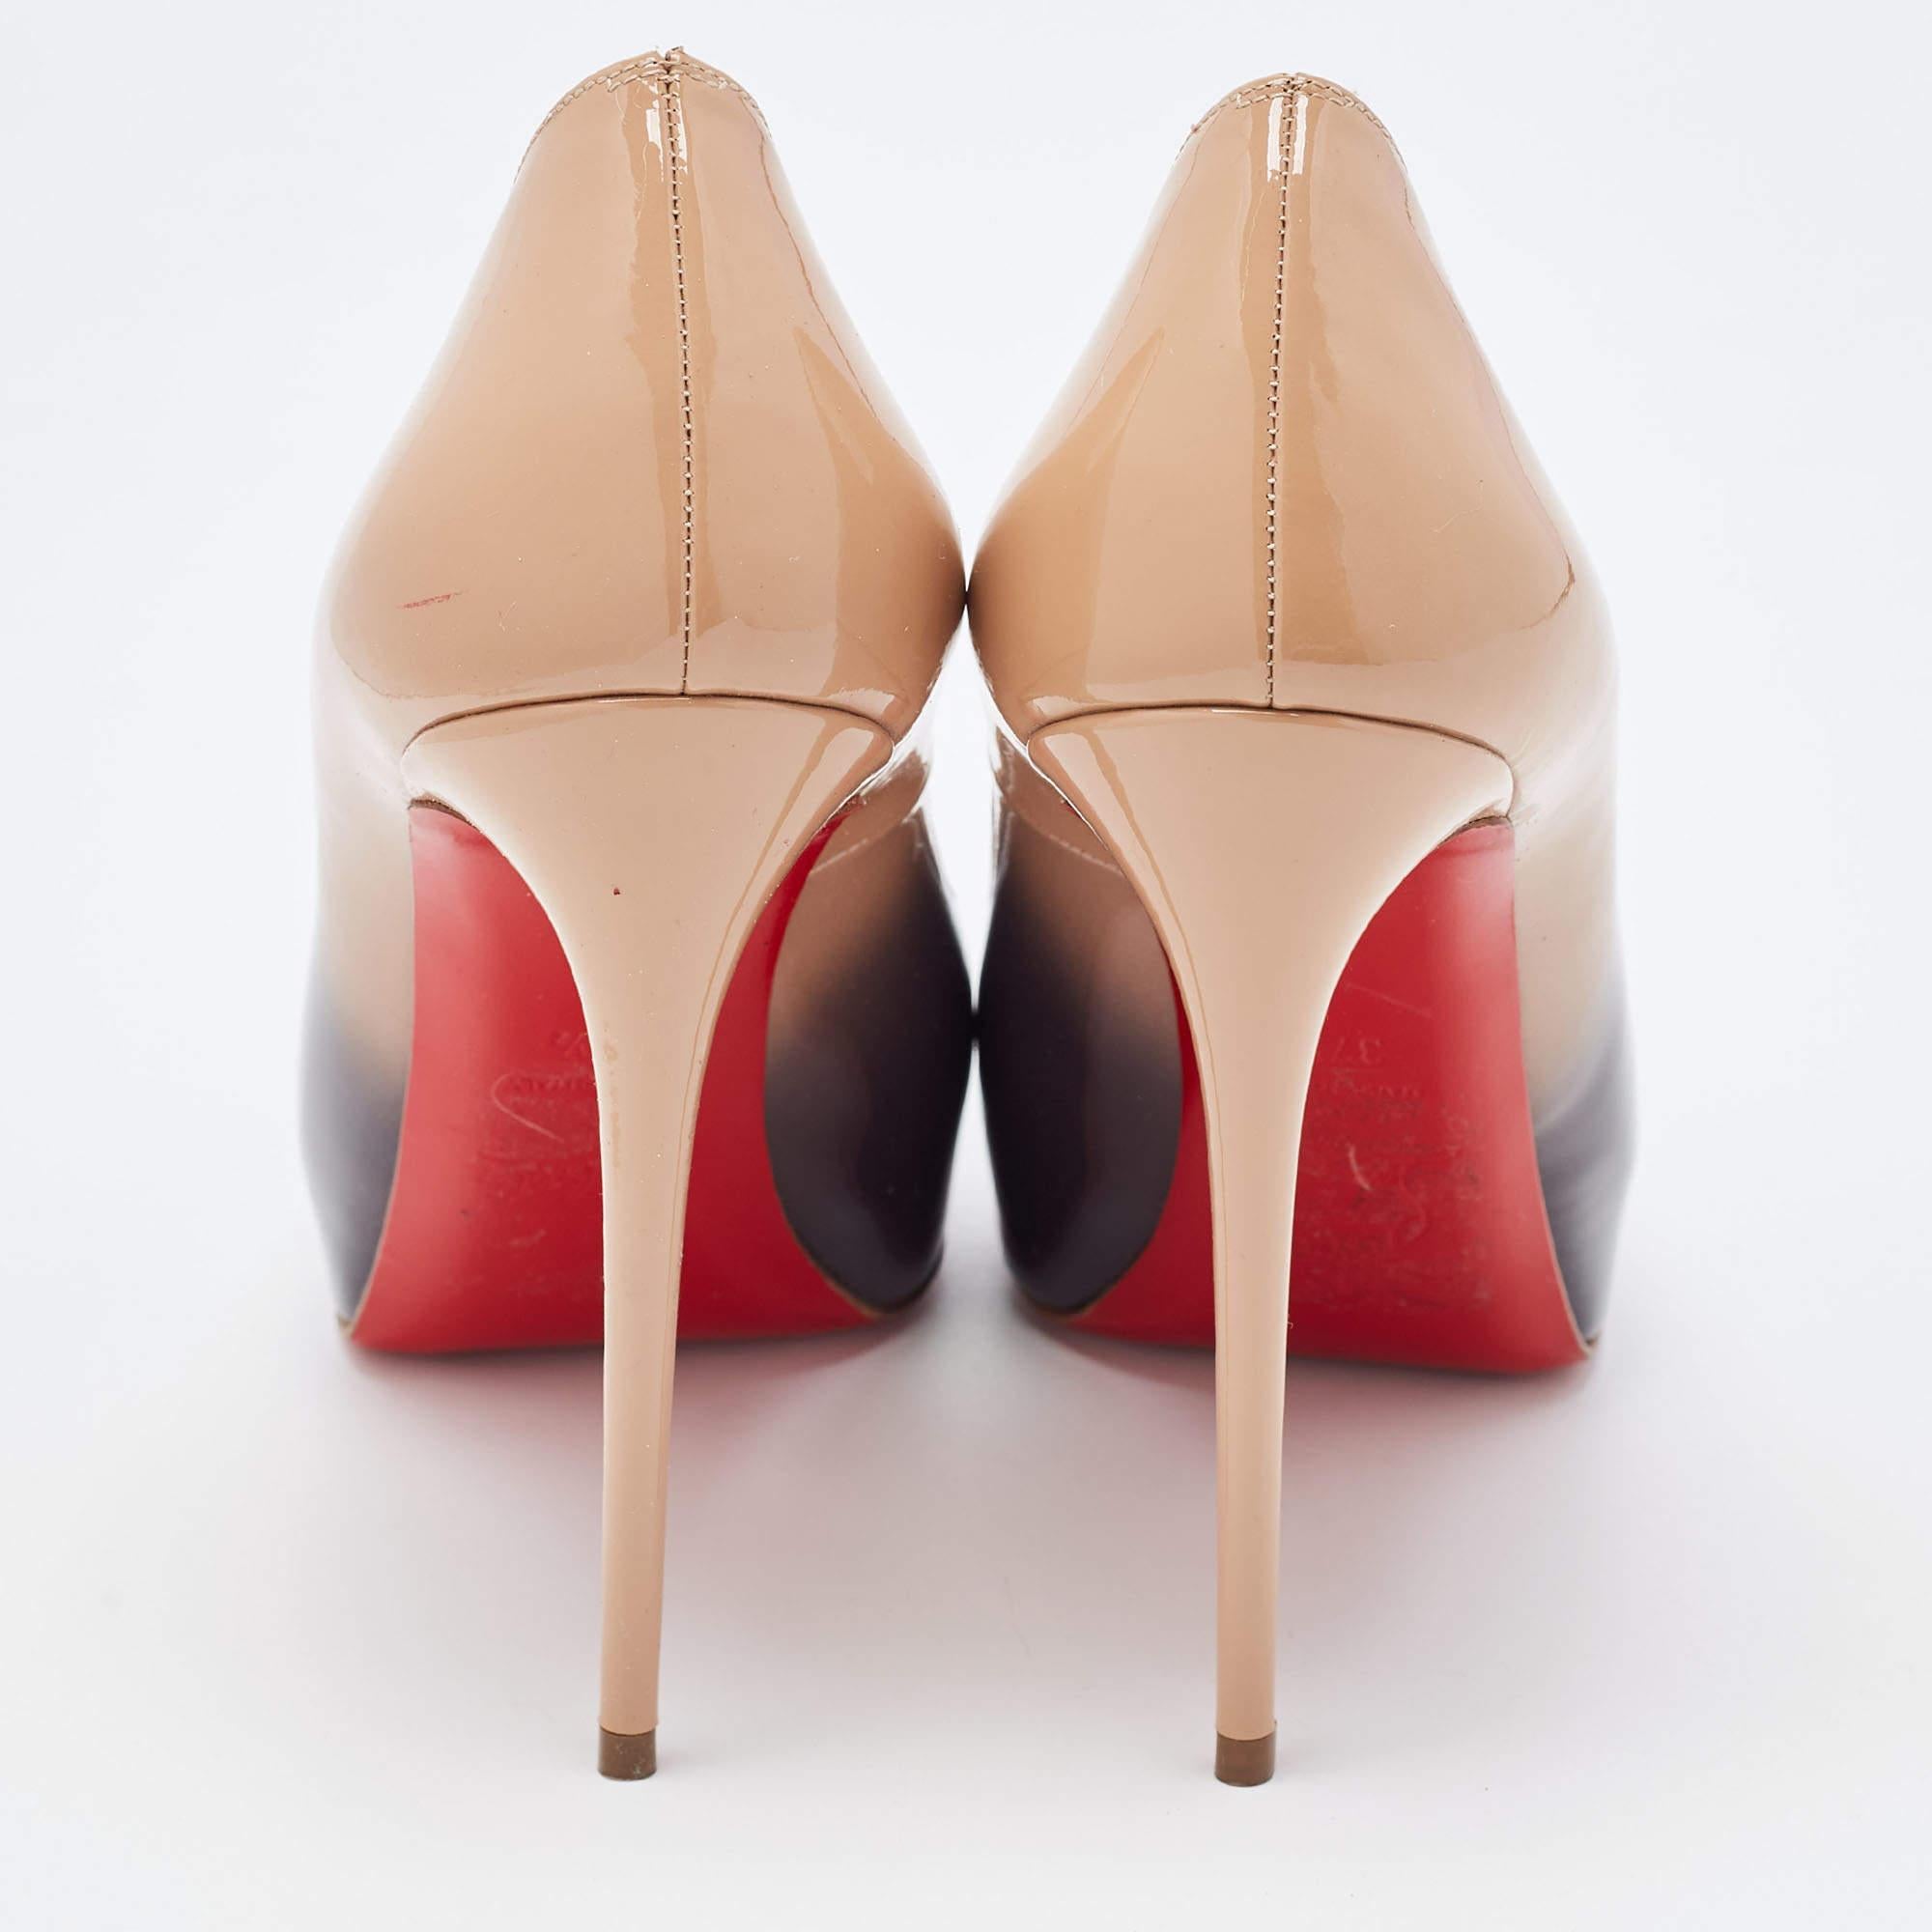 Beige Christian Louboutin Two Tone Ombre Patent Leather New Very Prive Pumps Size 37.5